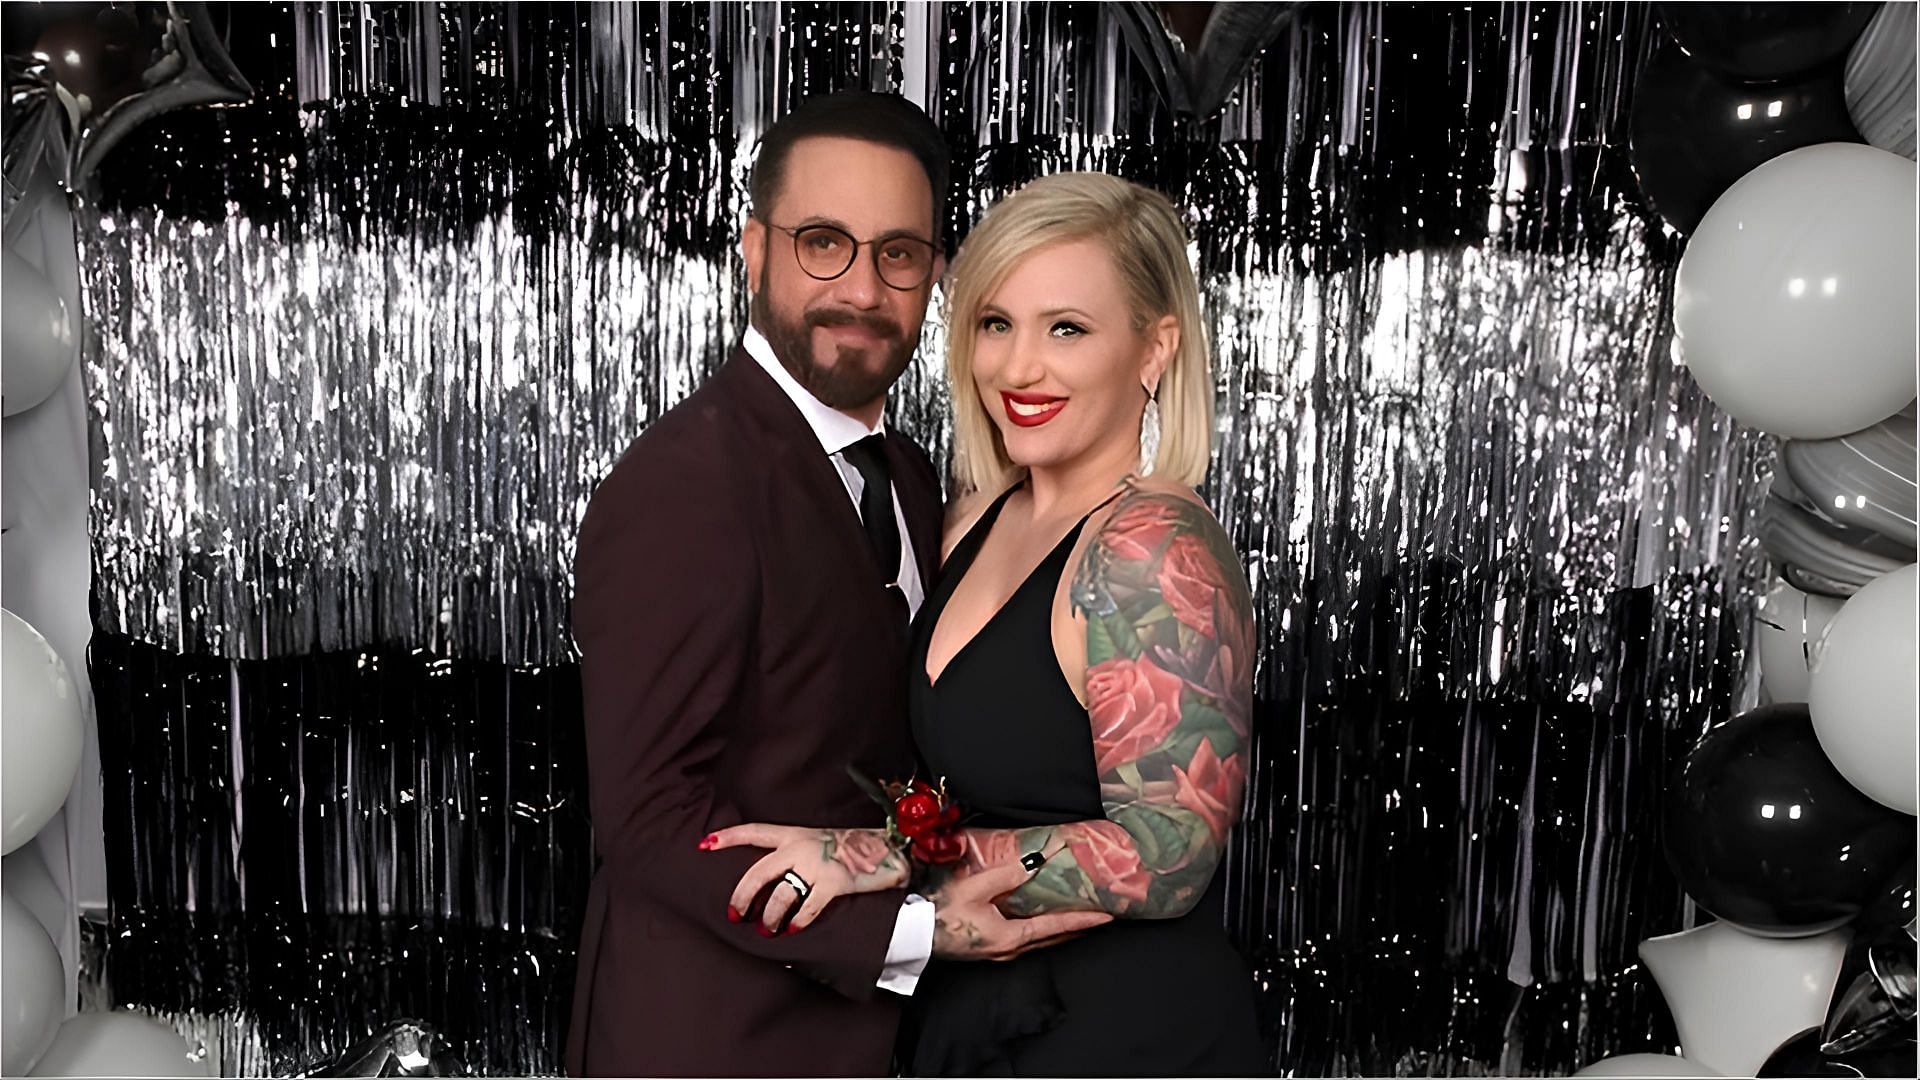 AJ McLean and Rochelle DeAnna McLean are getting divorced after being married for more than 10 years (Image via k77651361/X)